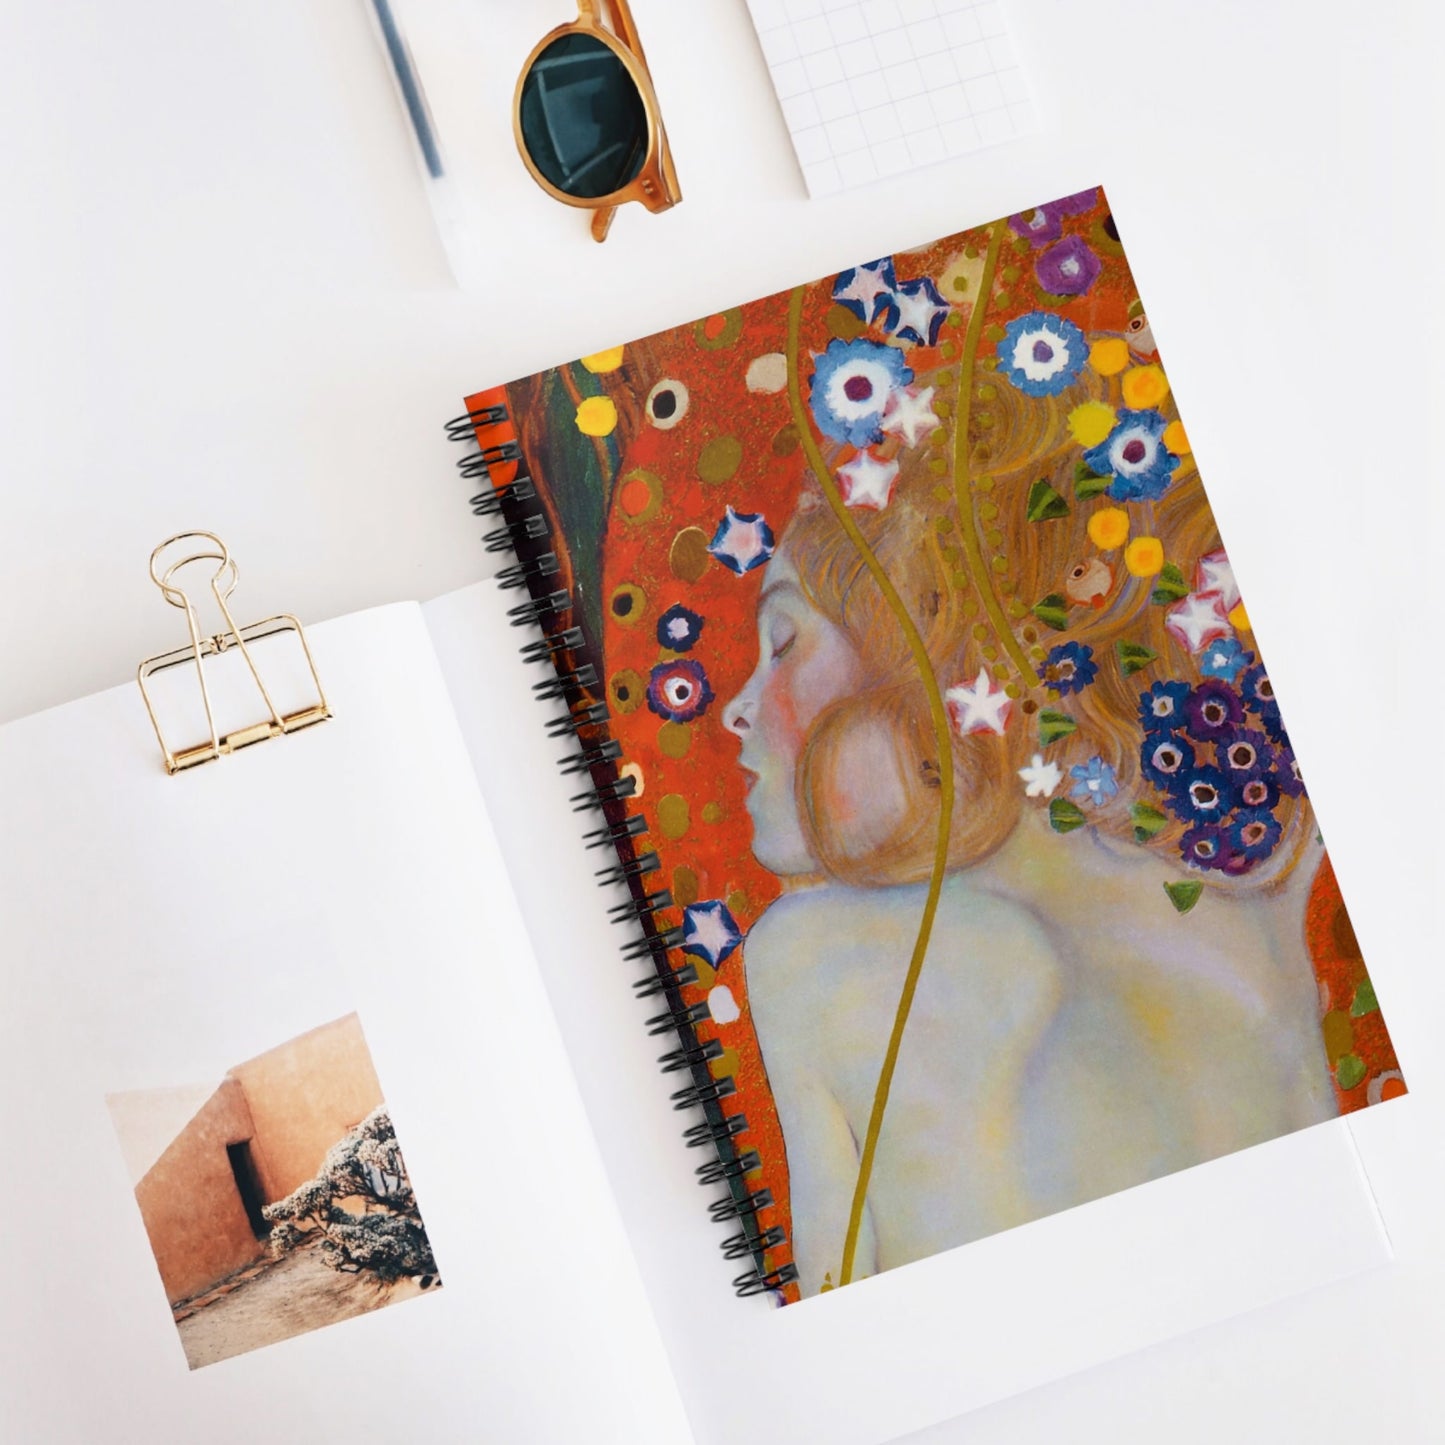 Woman with Flower Hair Spiral Notebook Displayed on Desk